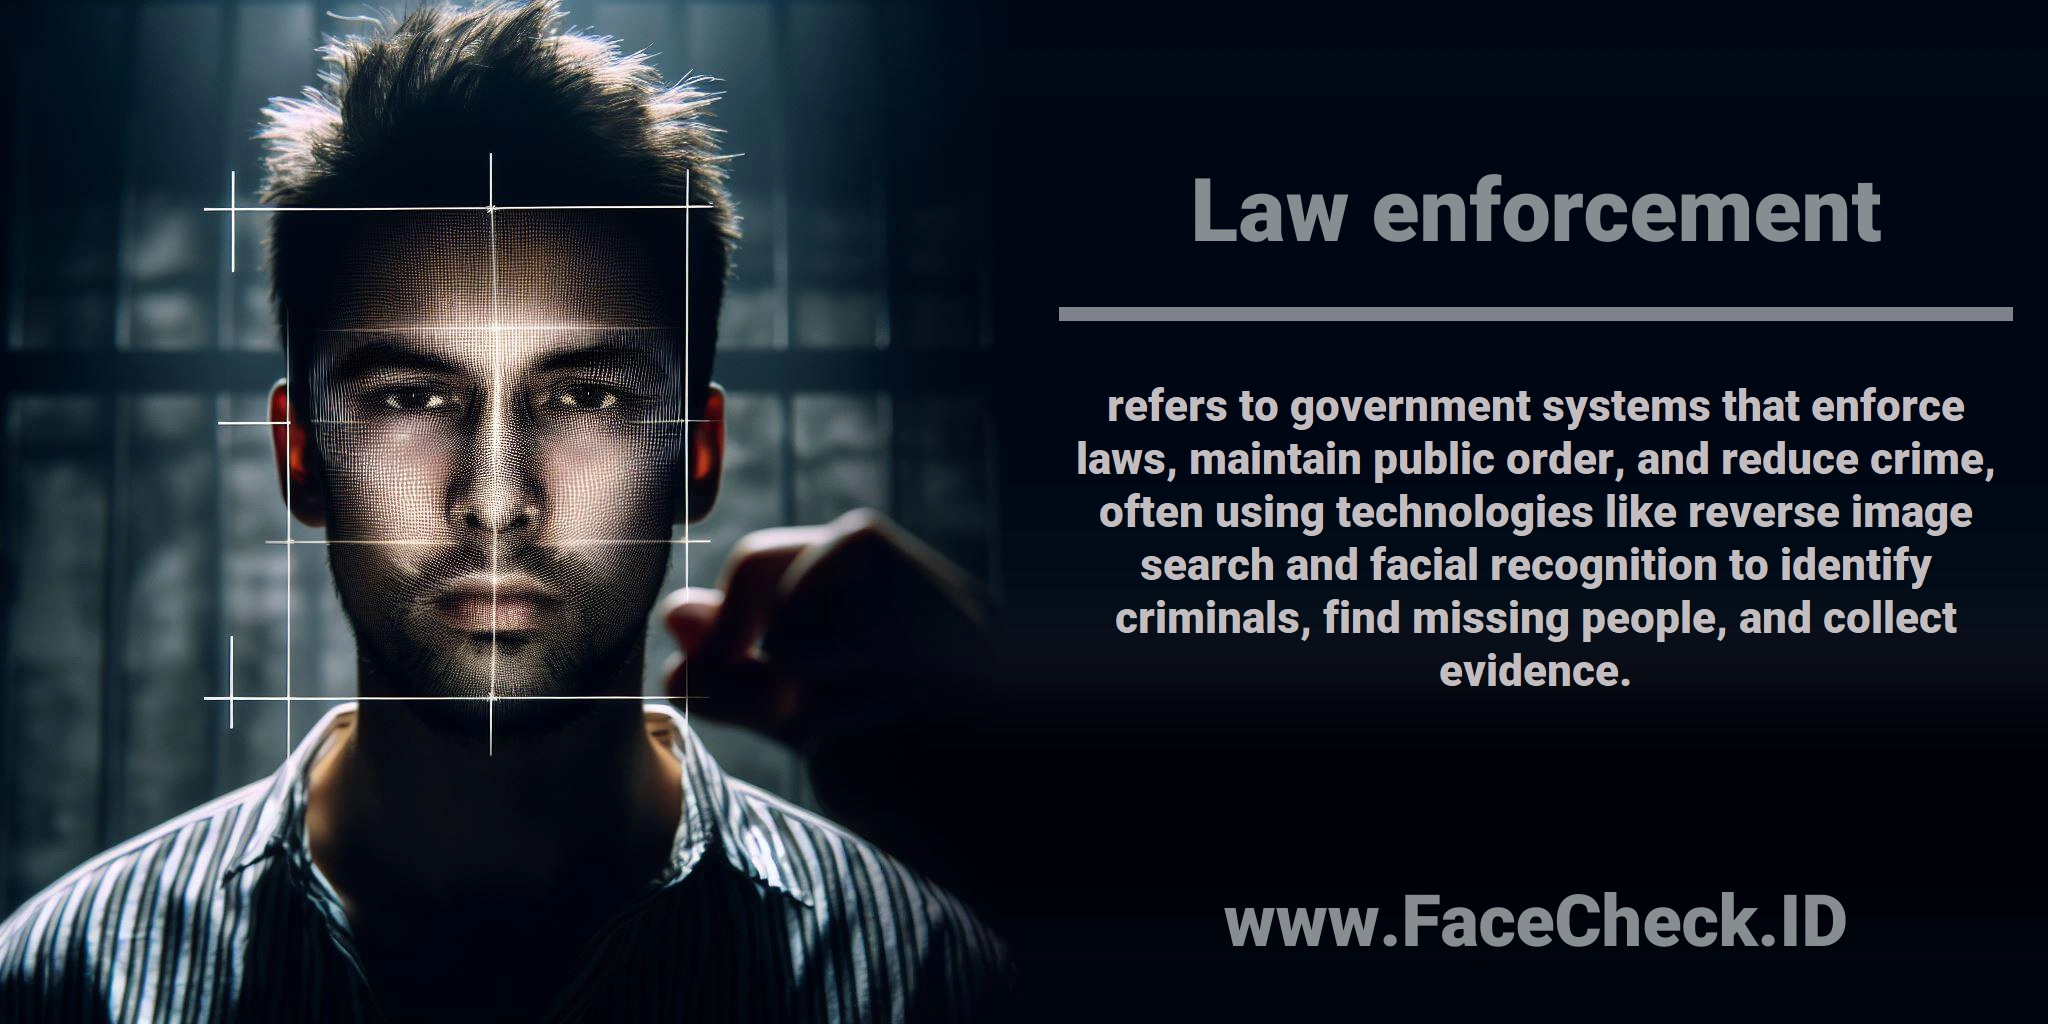 <b>Law enforcement</b> refers to government systems that enforce laws, maintain public order, and reduce crime, often using technologies like reverse image search and facial recognition to identify criminals, find missing people, and collect evidence.